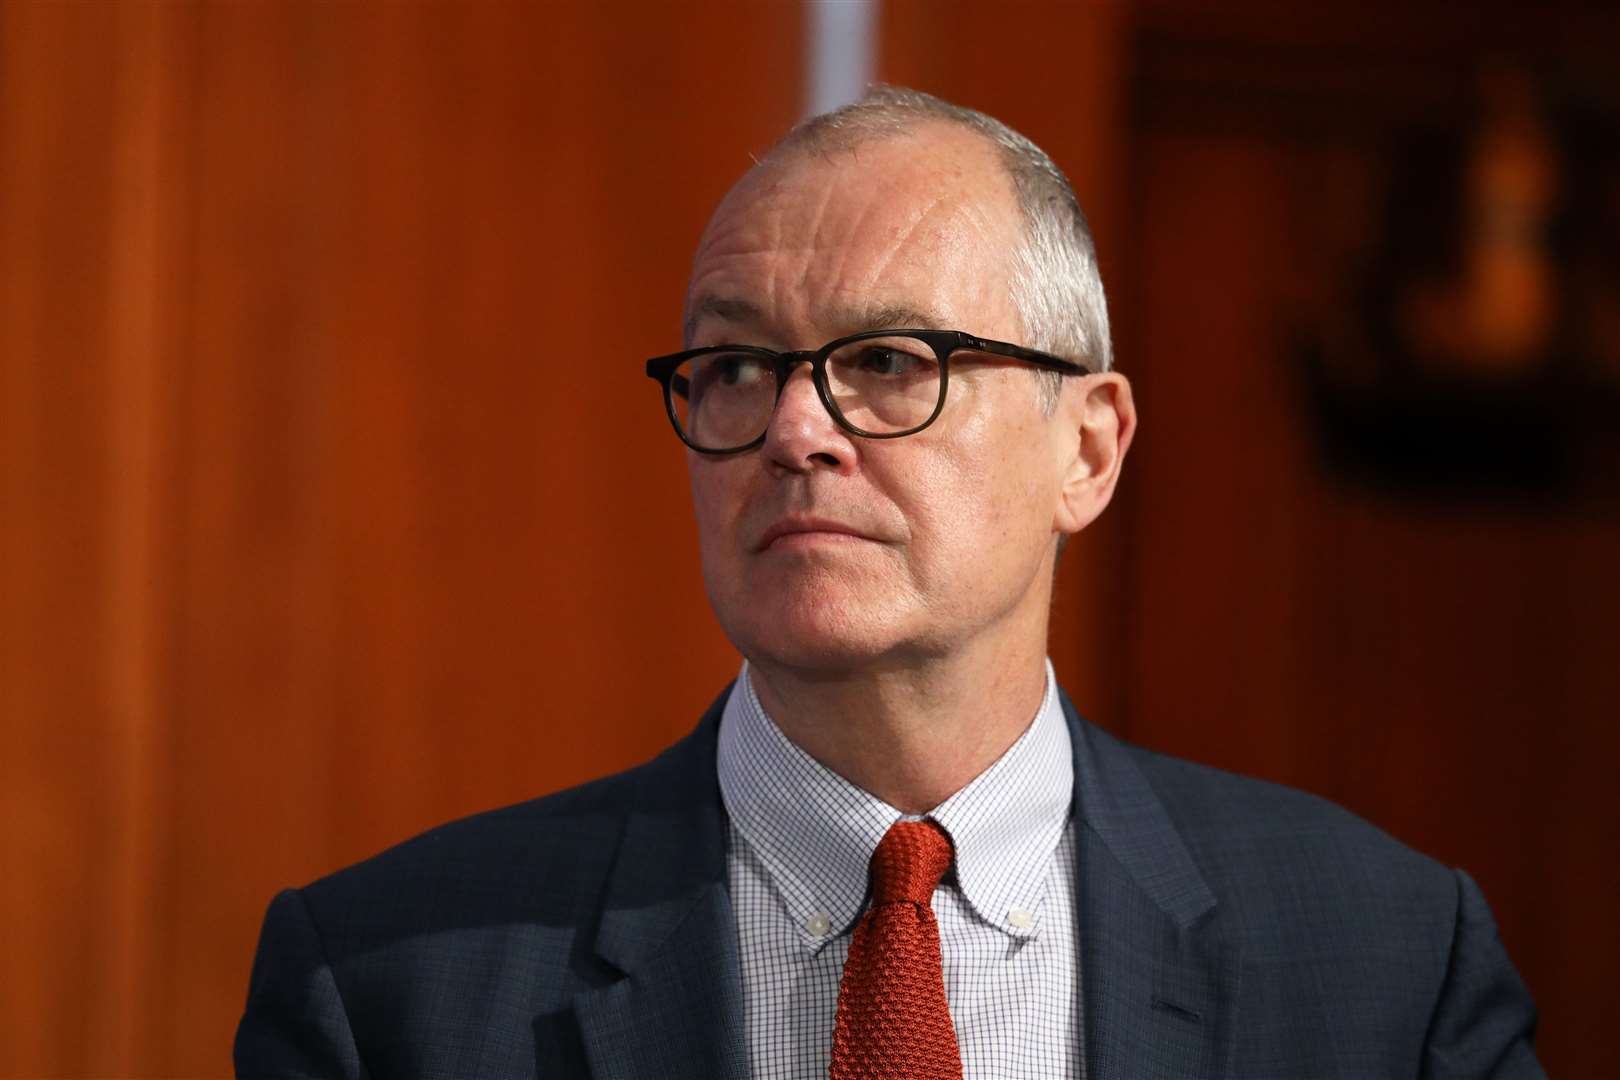 Lawyers for Sir Patrick Vallance say the inquiry’s use of the notes amounts to an interference in his right to private and family life (Dan Kitwood/PA)